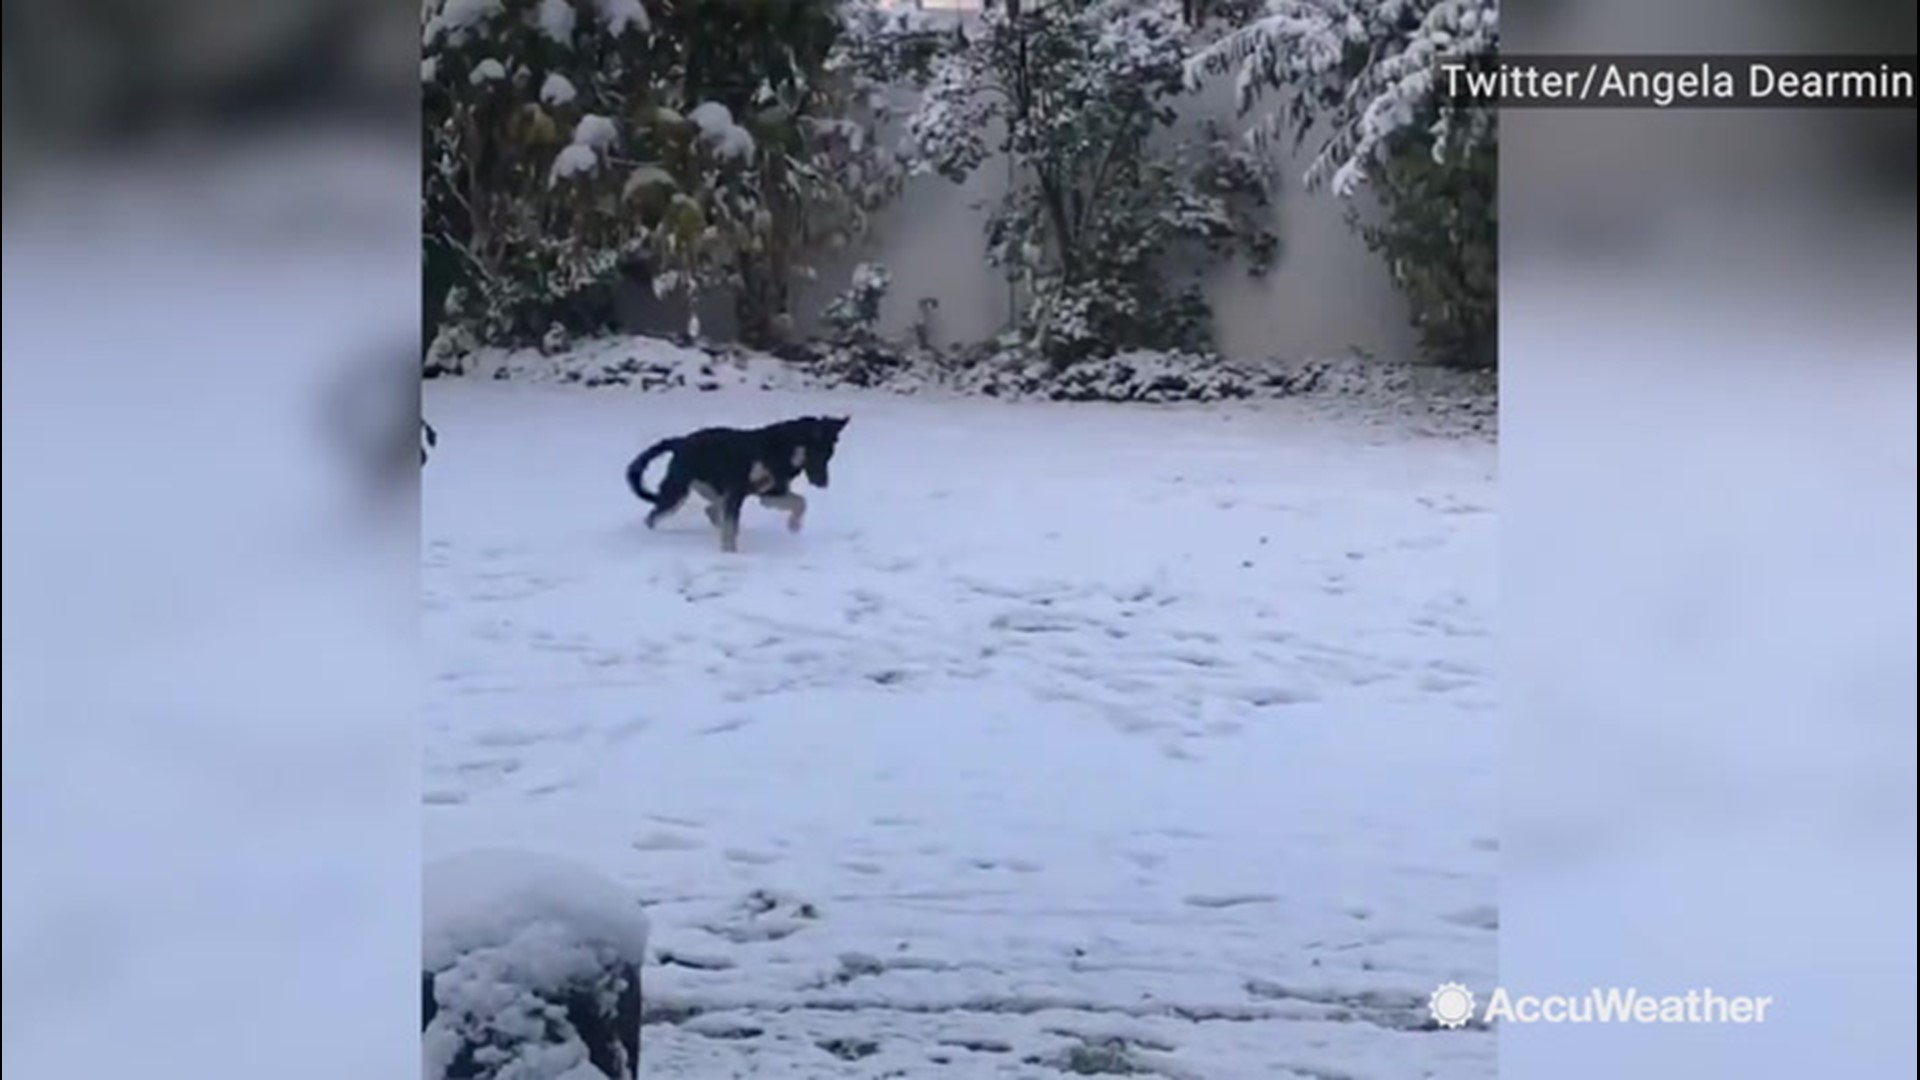 On Oct. 9, another blast of snow hit Coeur D'Alene, Idaho, giving the whole town of covering of white powder that left one dog very excited.